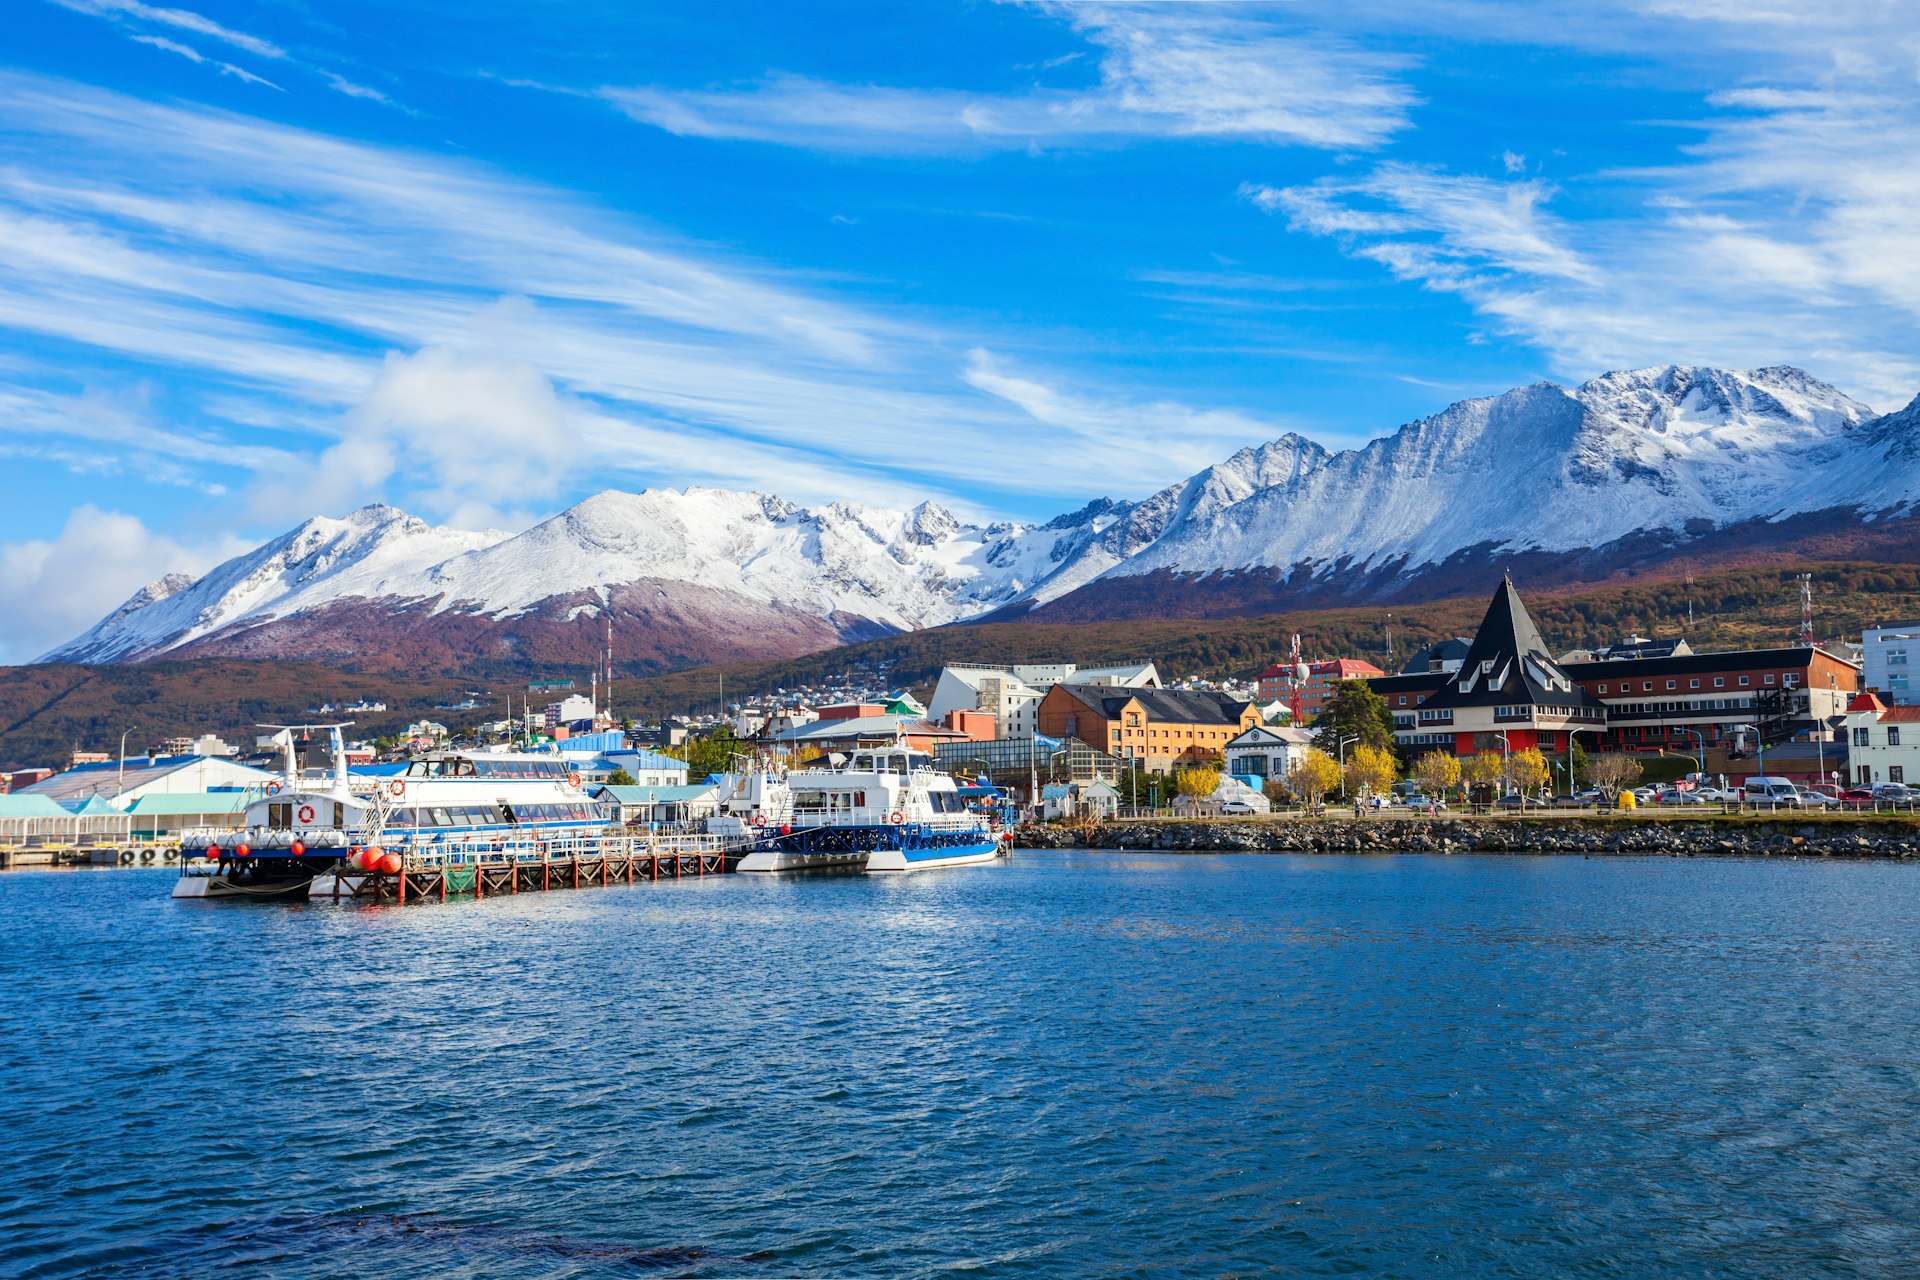 A small harbor lined with boats and catamarans; snow-capped mountains rise behind the town